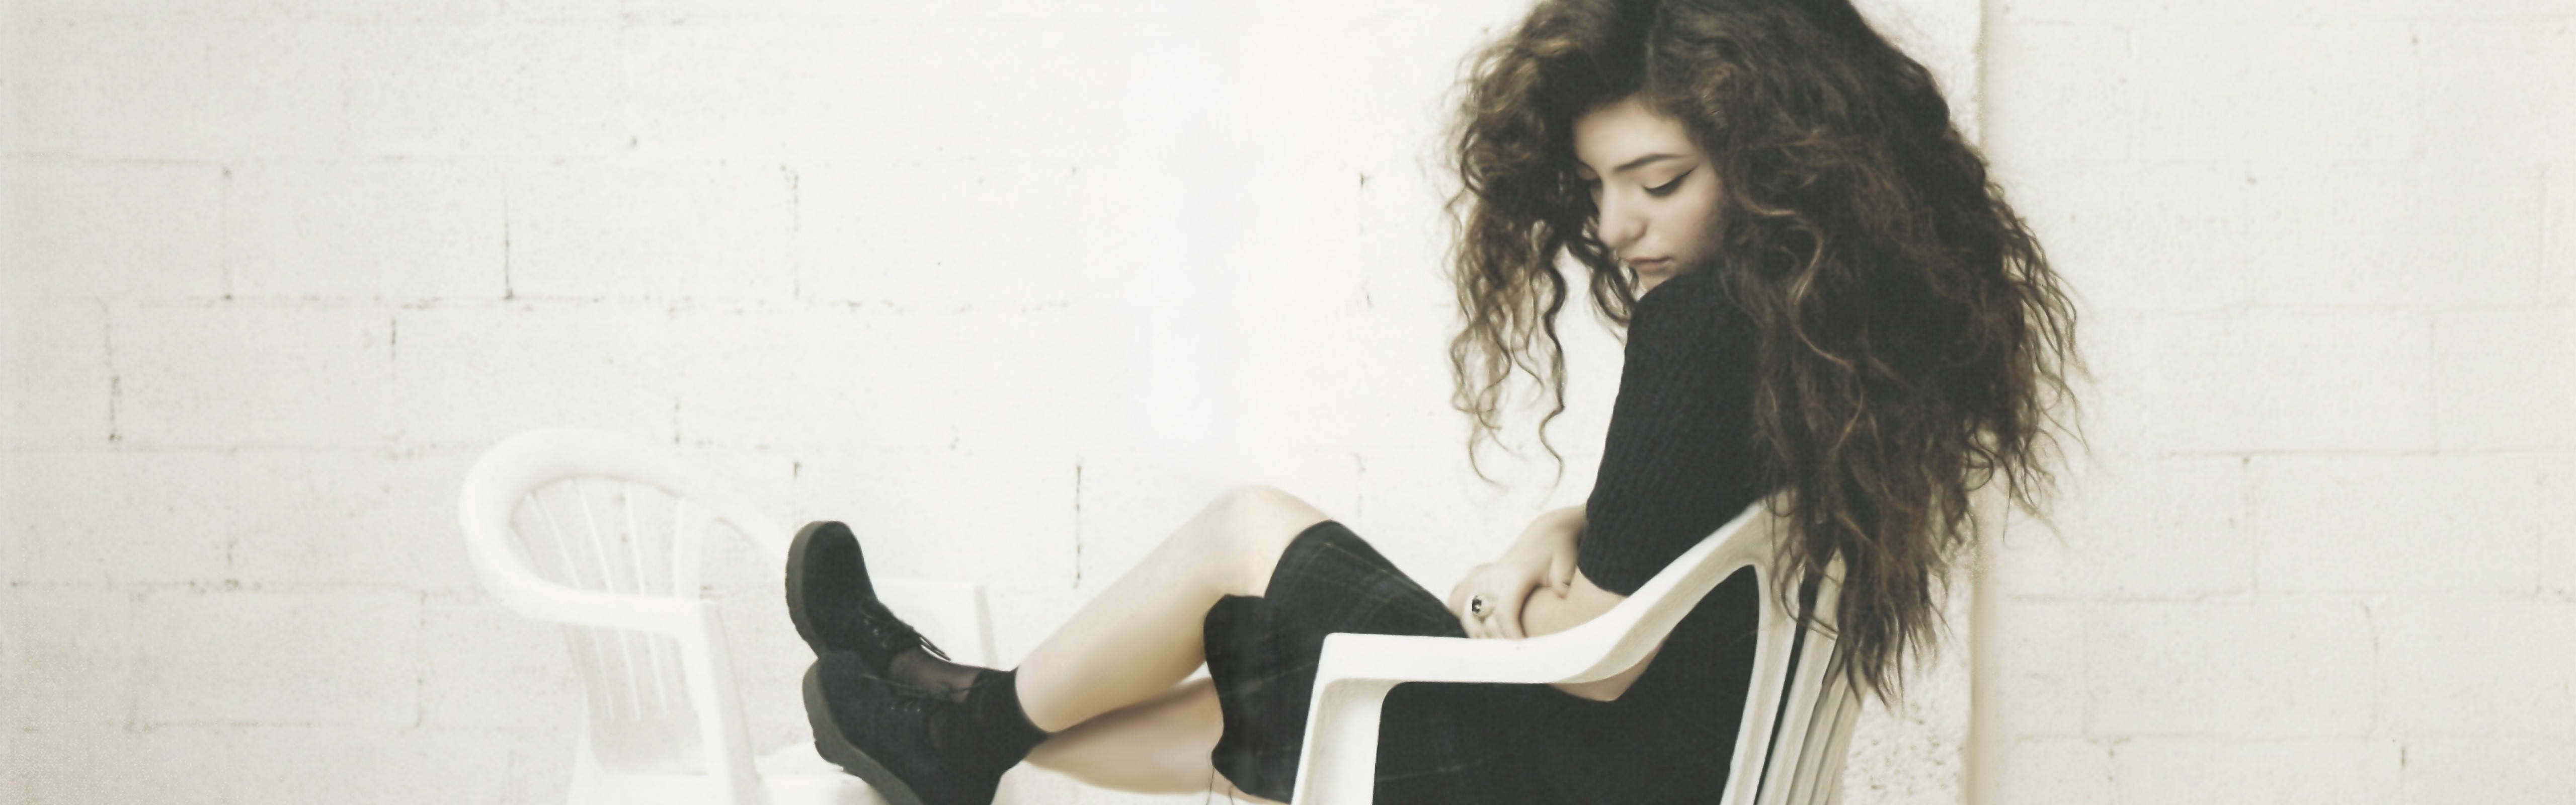 Lorde In Chair Dual Monitor Background